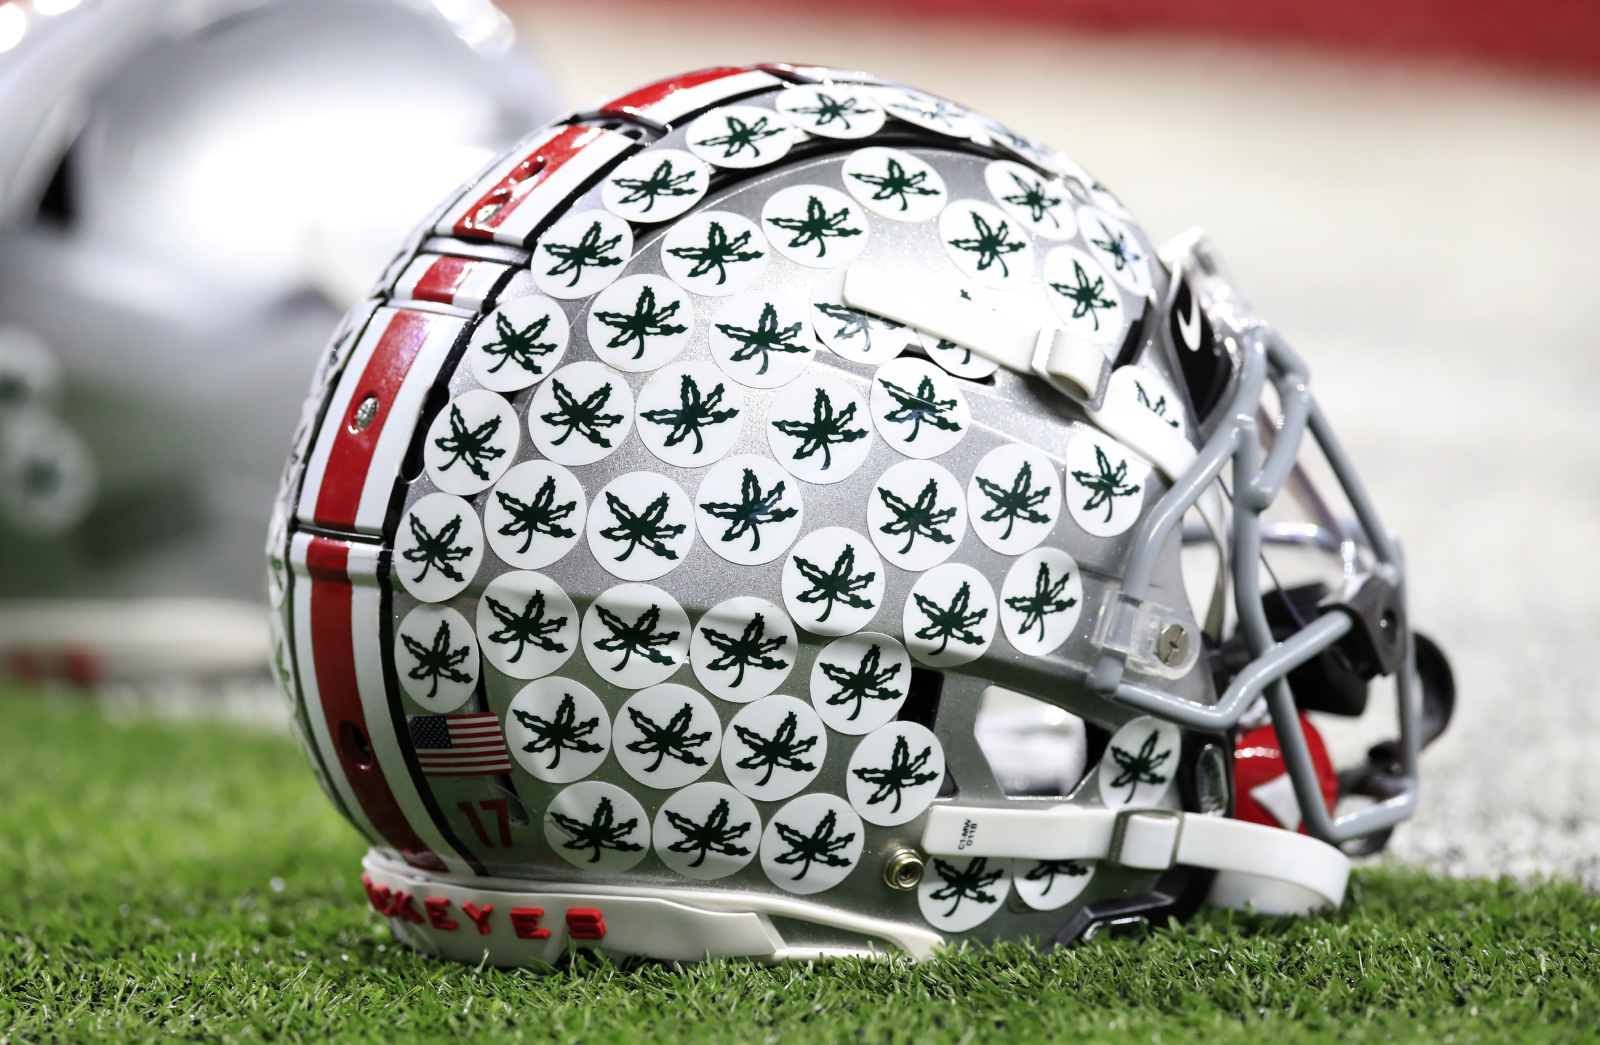 Ohio State is one of the best college football programs in the country. So, why does Ohio State put stickers on its players' helmets?